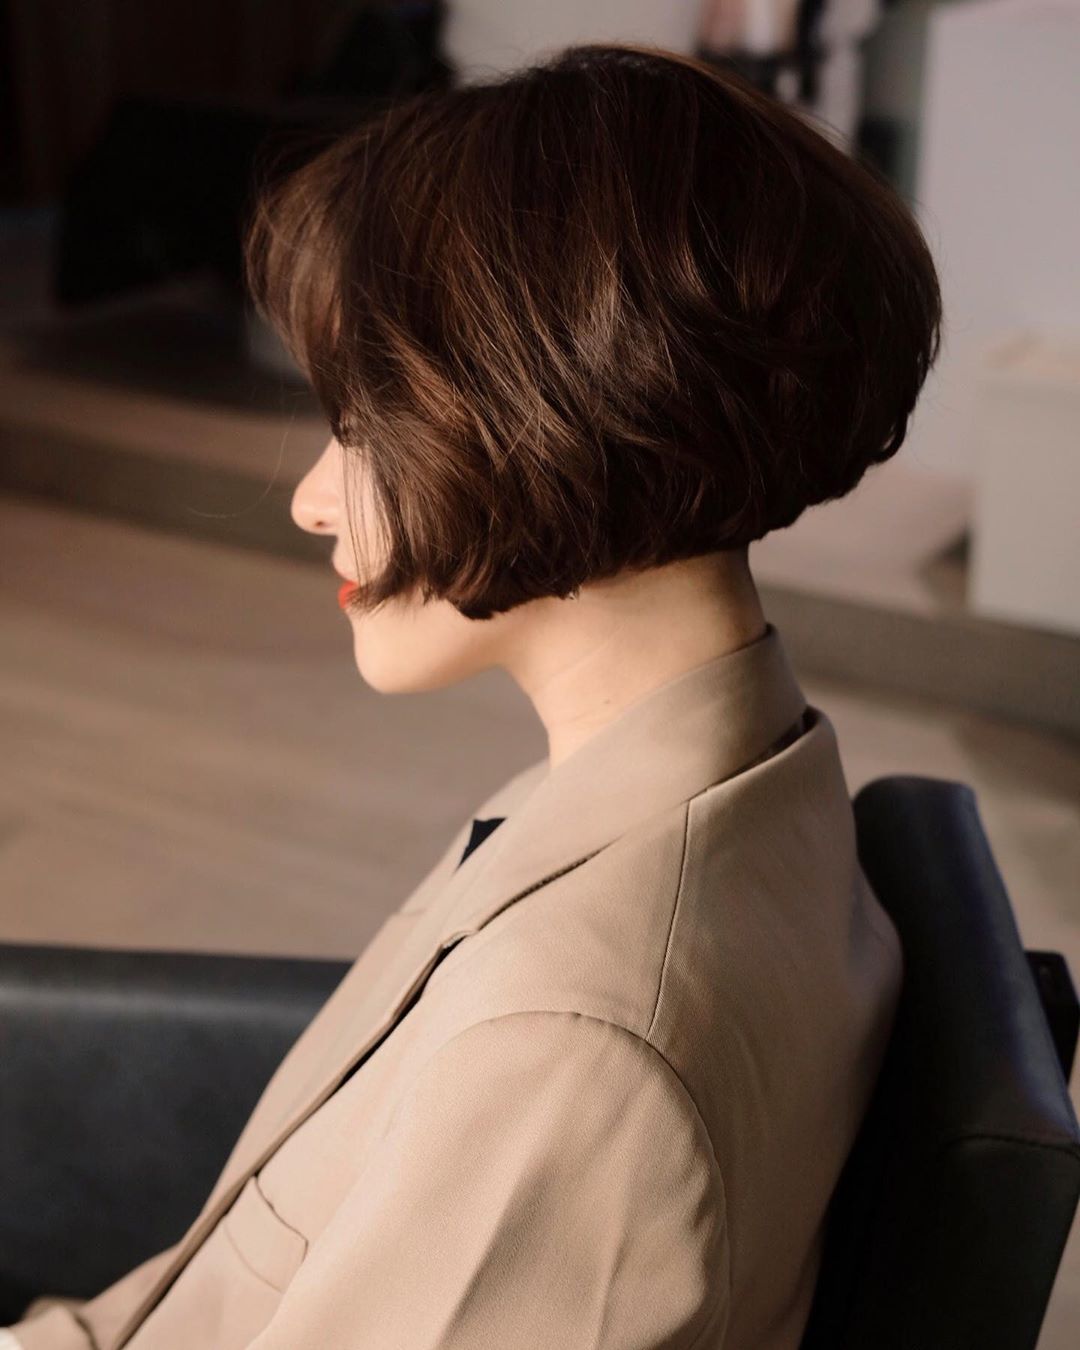 52 Cute Cute Haircuts For Short Hair With Bangs for Rounded Face